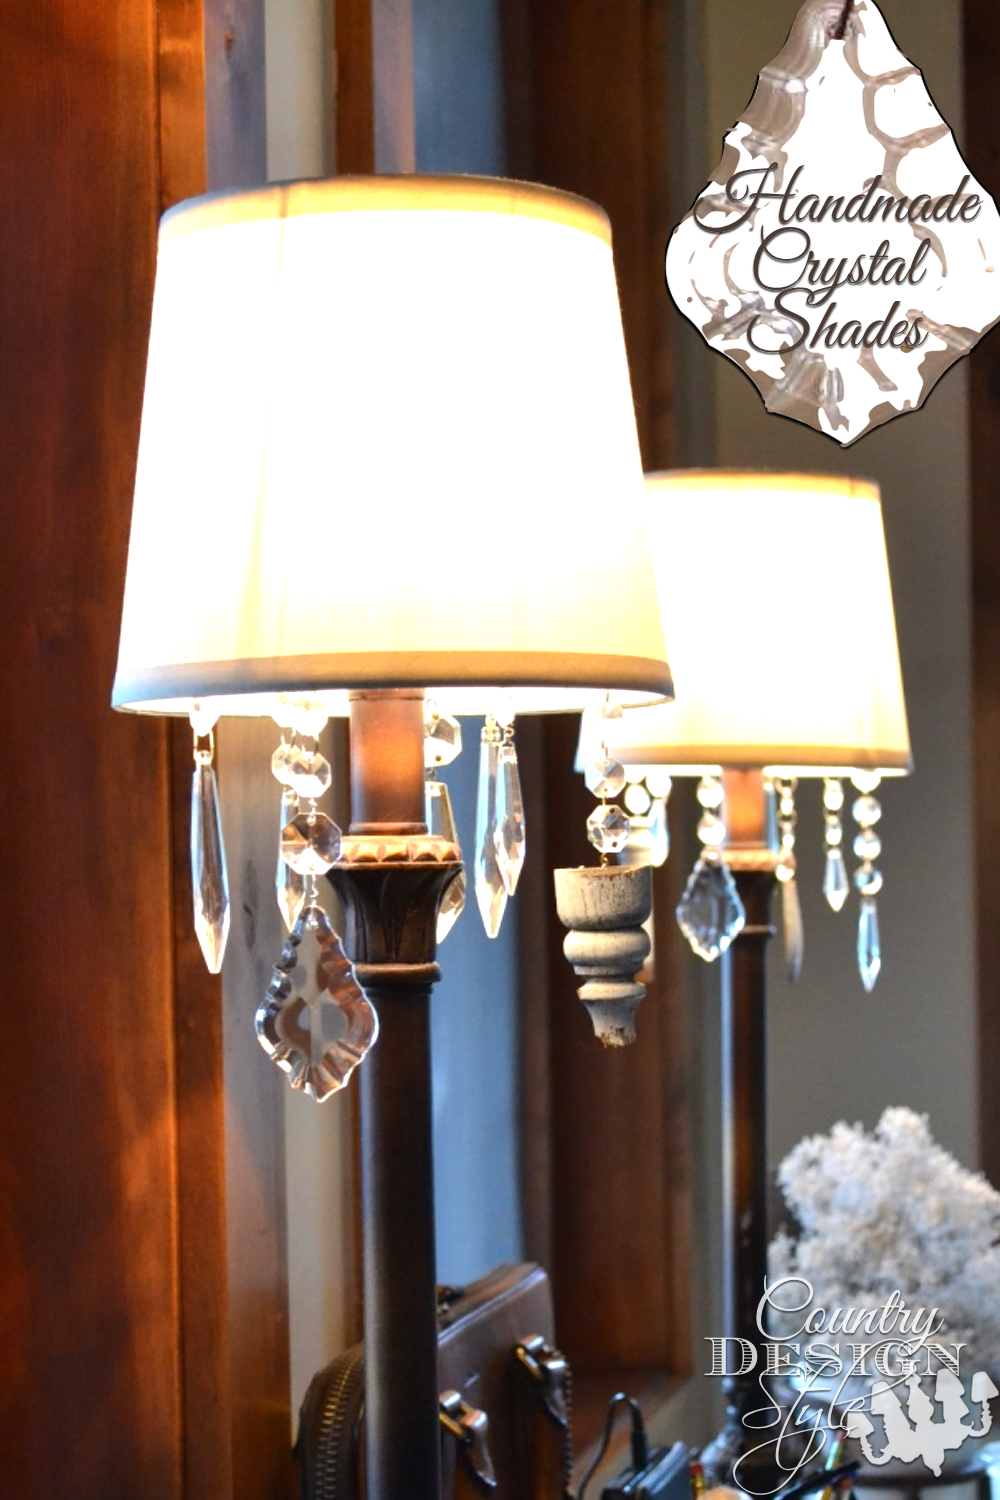 Easy trick to add hanging crystals to basic inexpensive lamp shades. Country Design Style